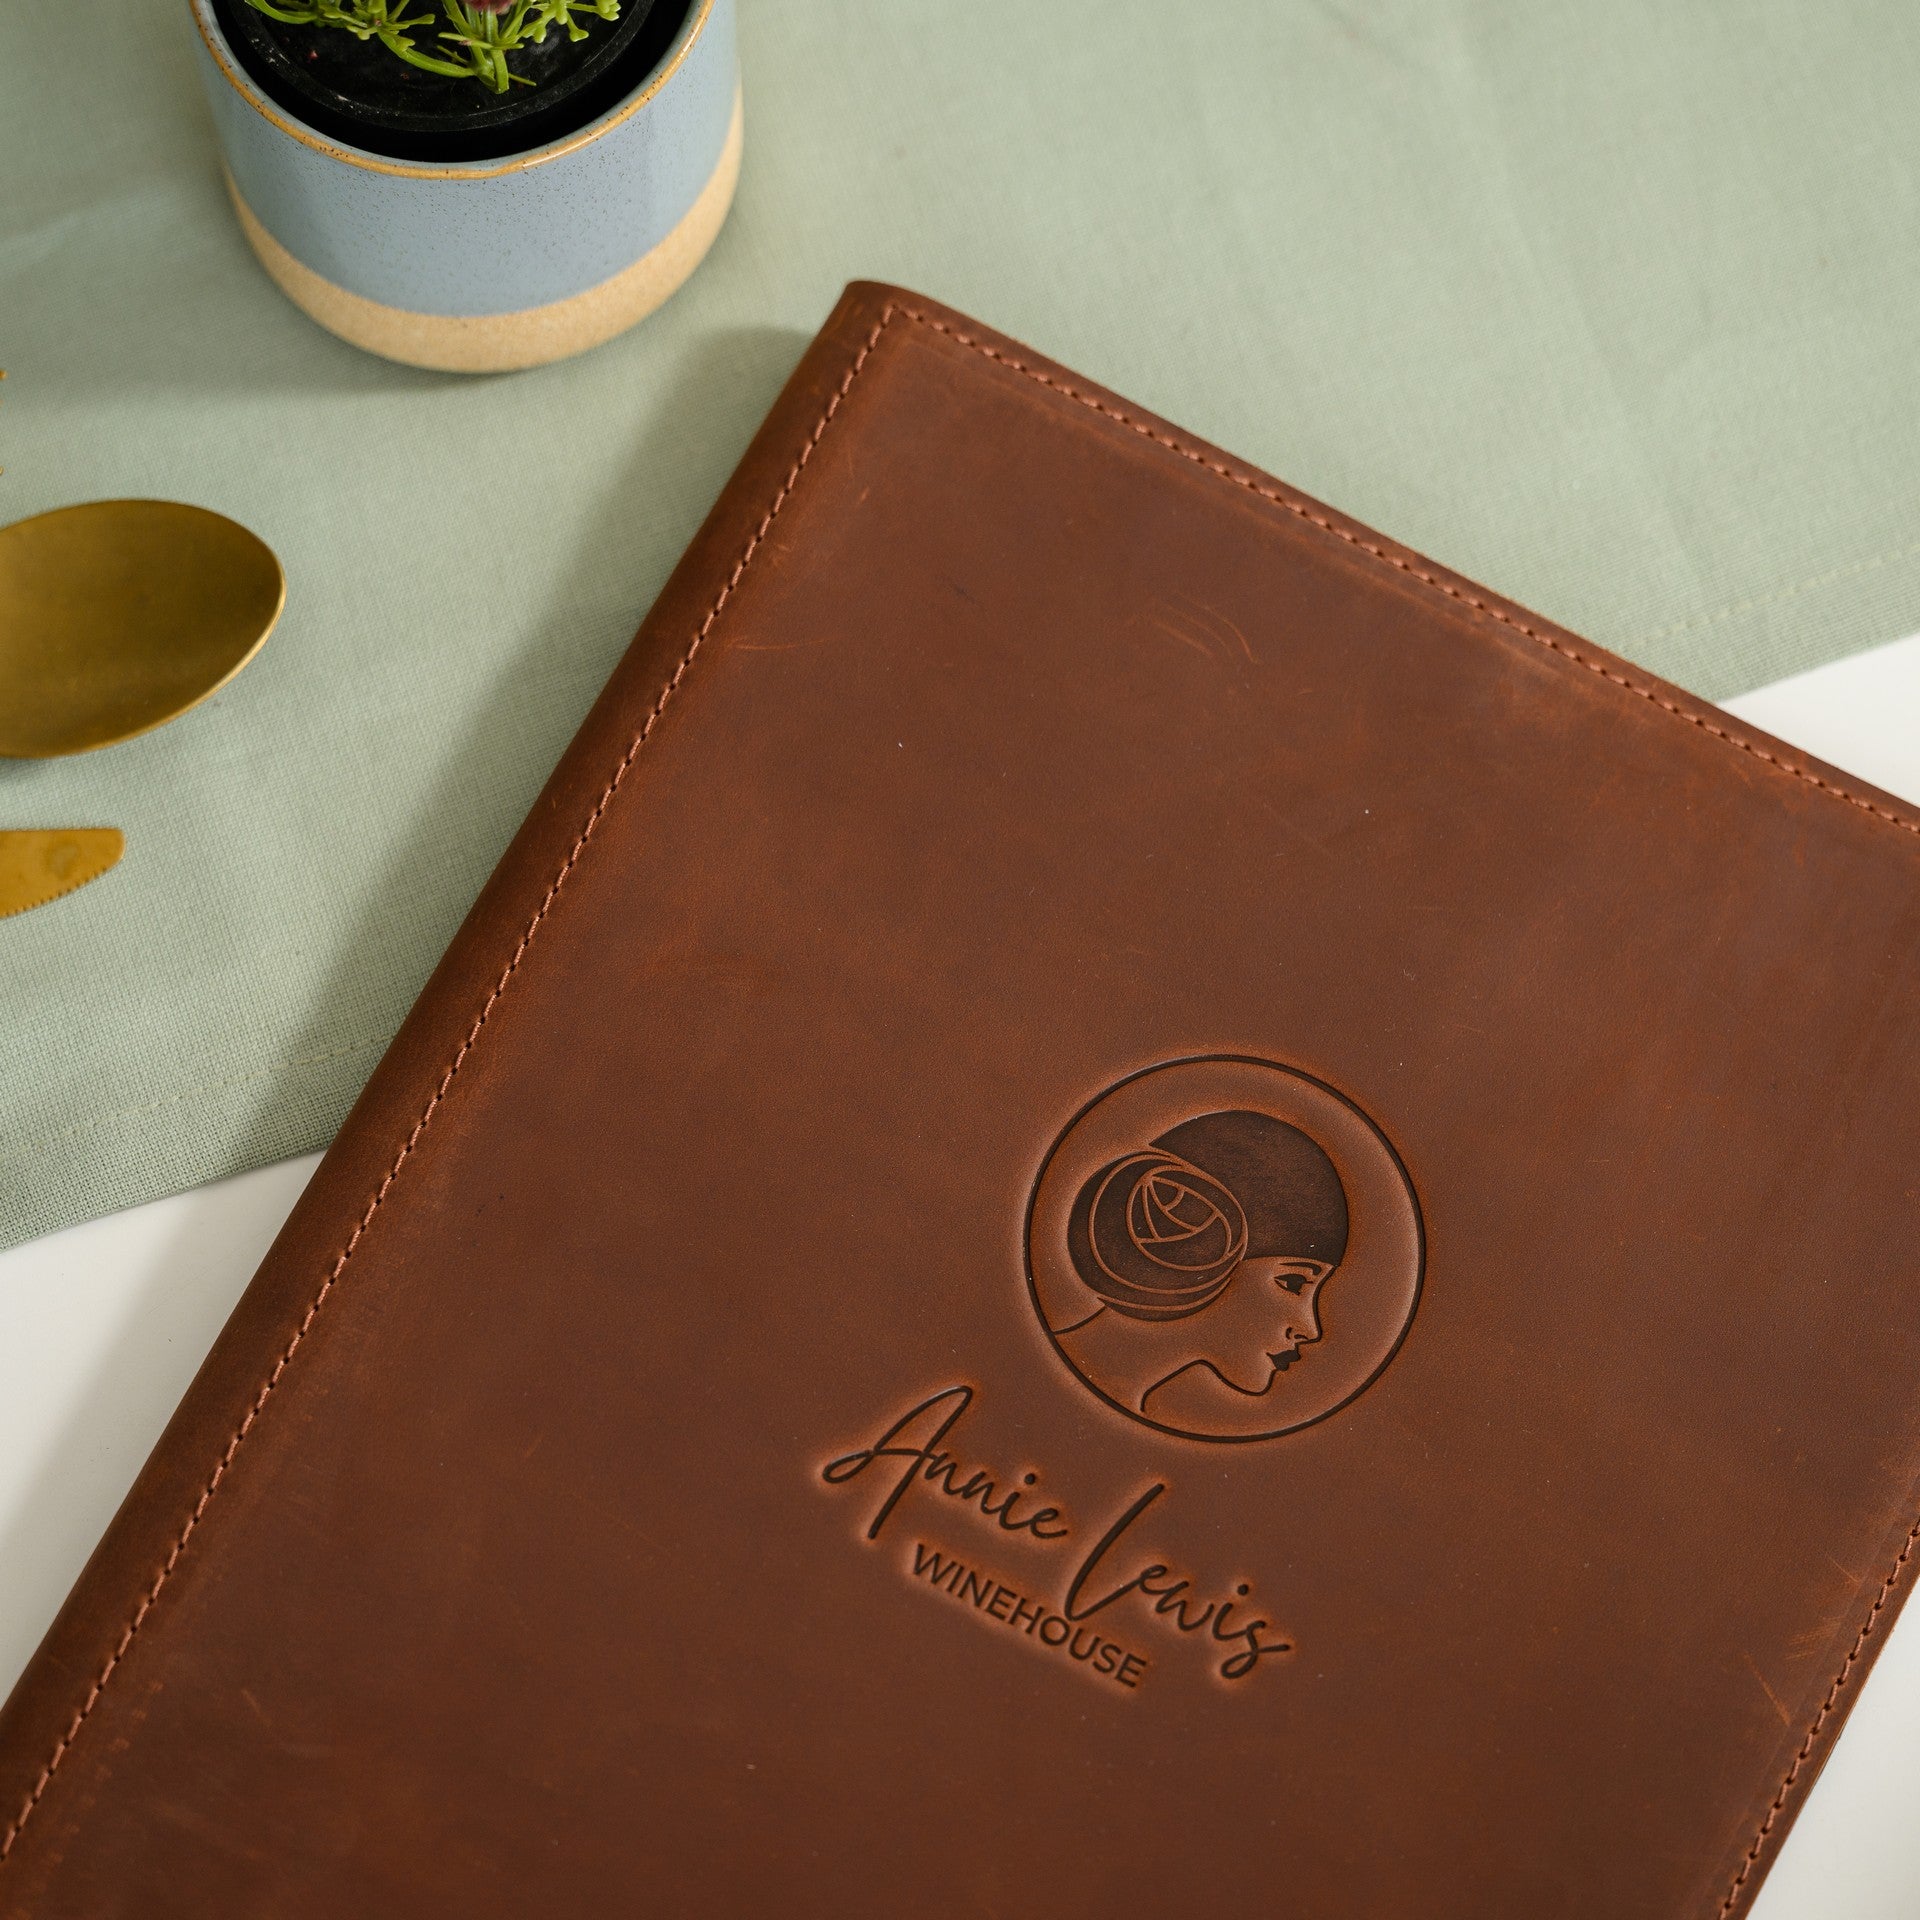 Our leather menu holder accommodates changeable sheets, ensuring your menu stays fresh and updated.